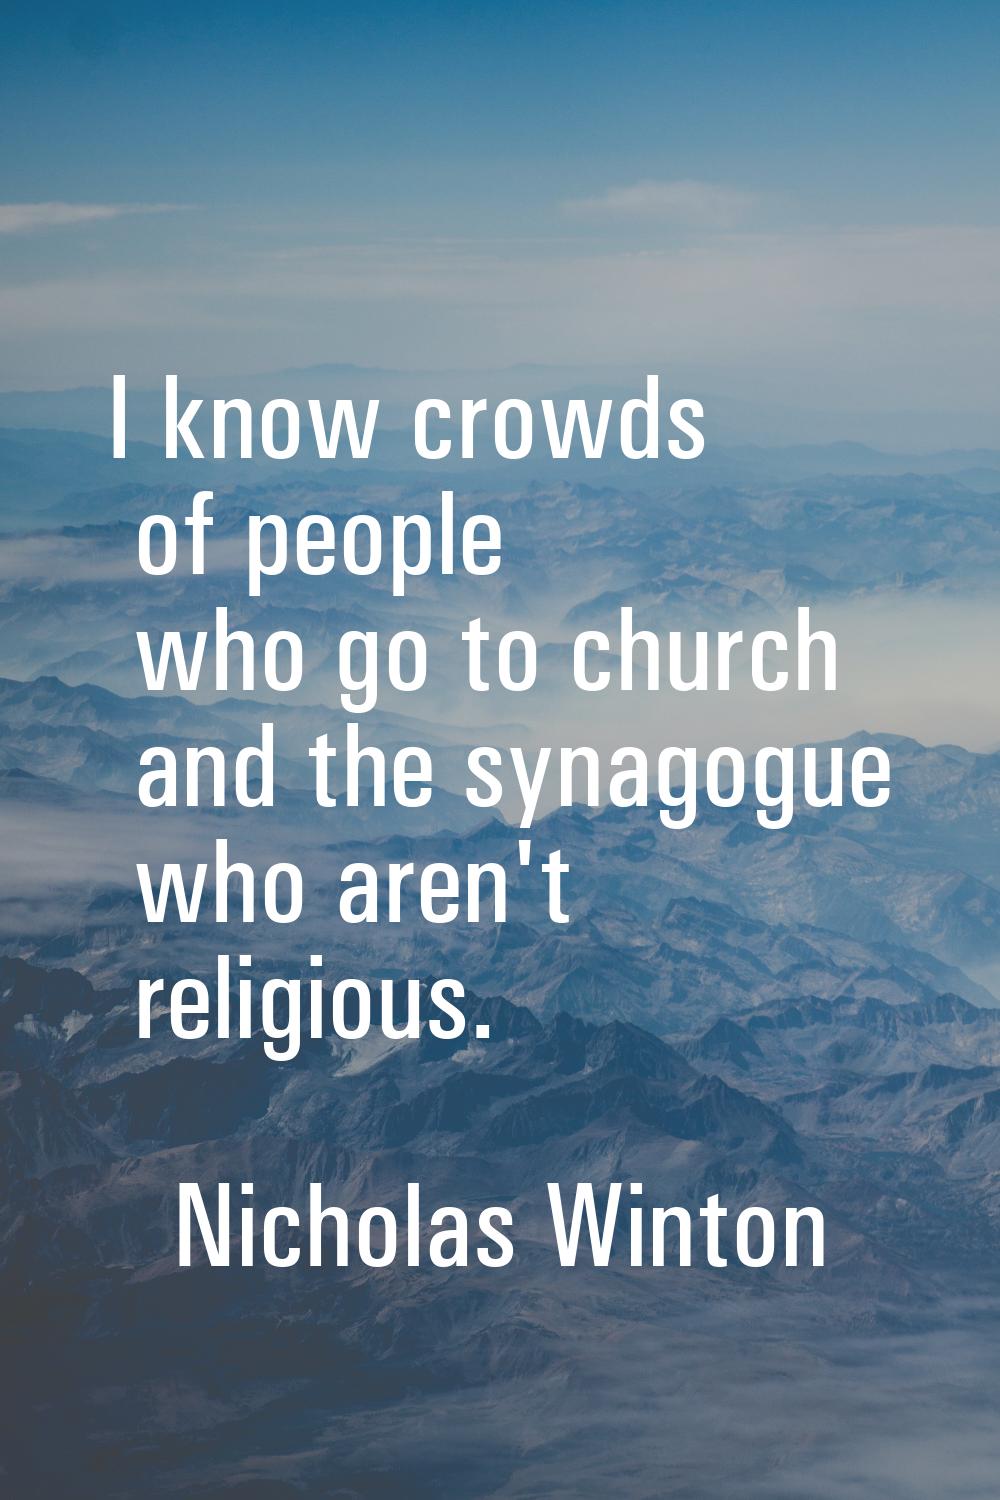 I know crowds of people who go to church and the synagogue who aren't religious.